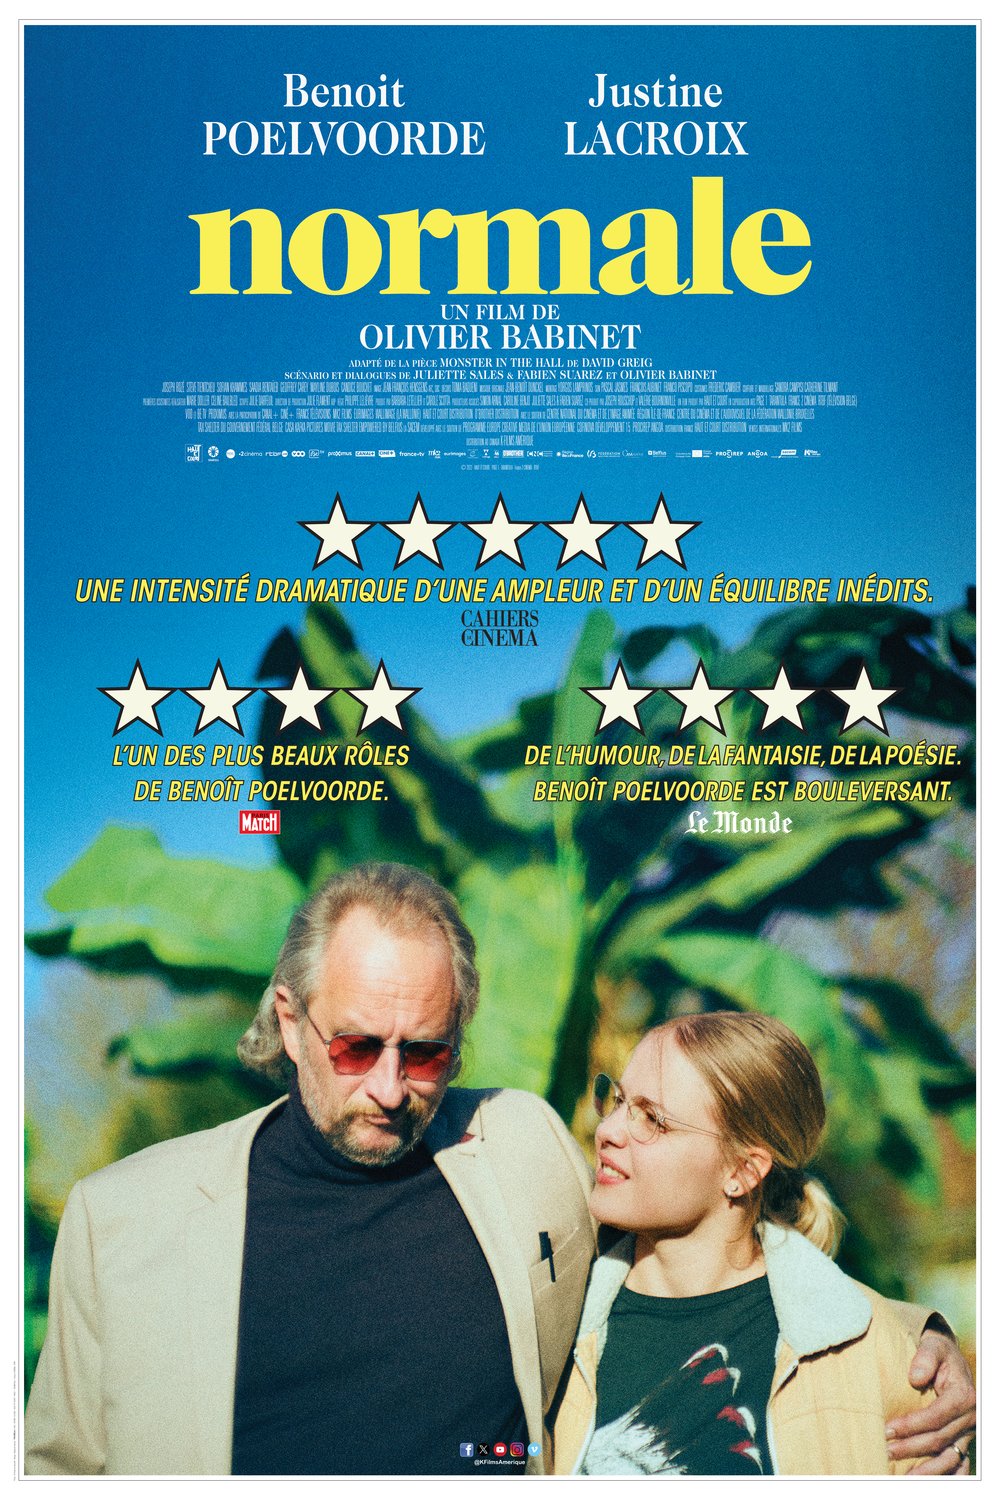 Poster of the movie Normale